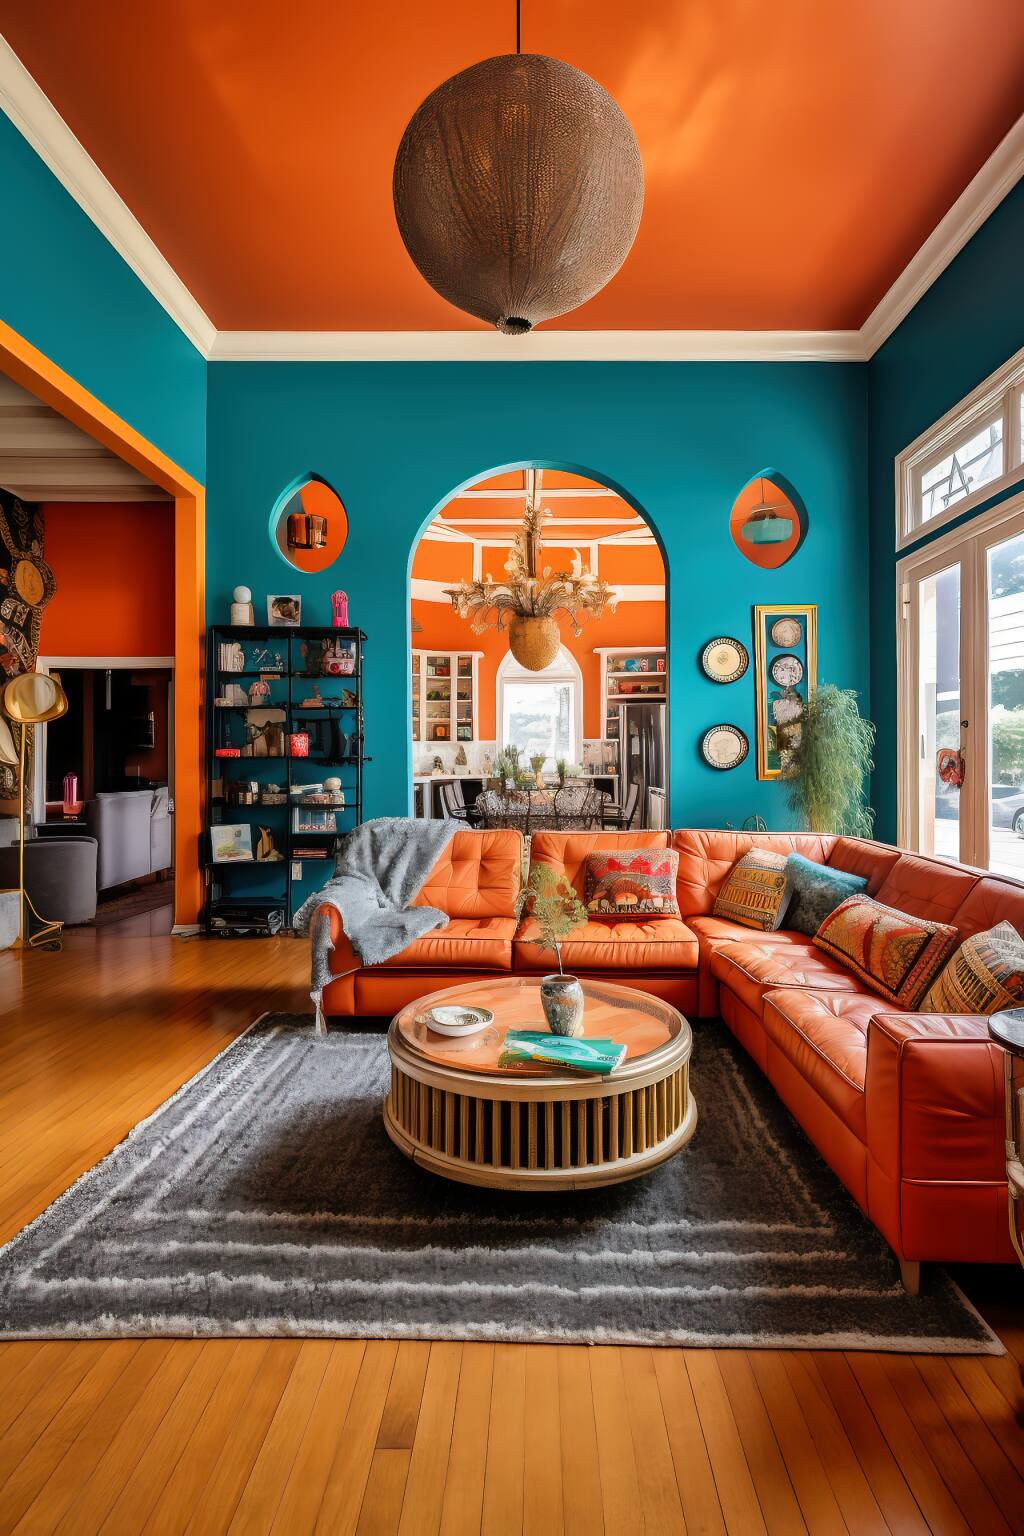 Modern Bohemian Living Room In Teal And Coral, Featuring A Modular Sectional Sofa, Abstract Art, And Geometric Accent Pillows.